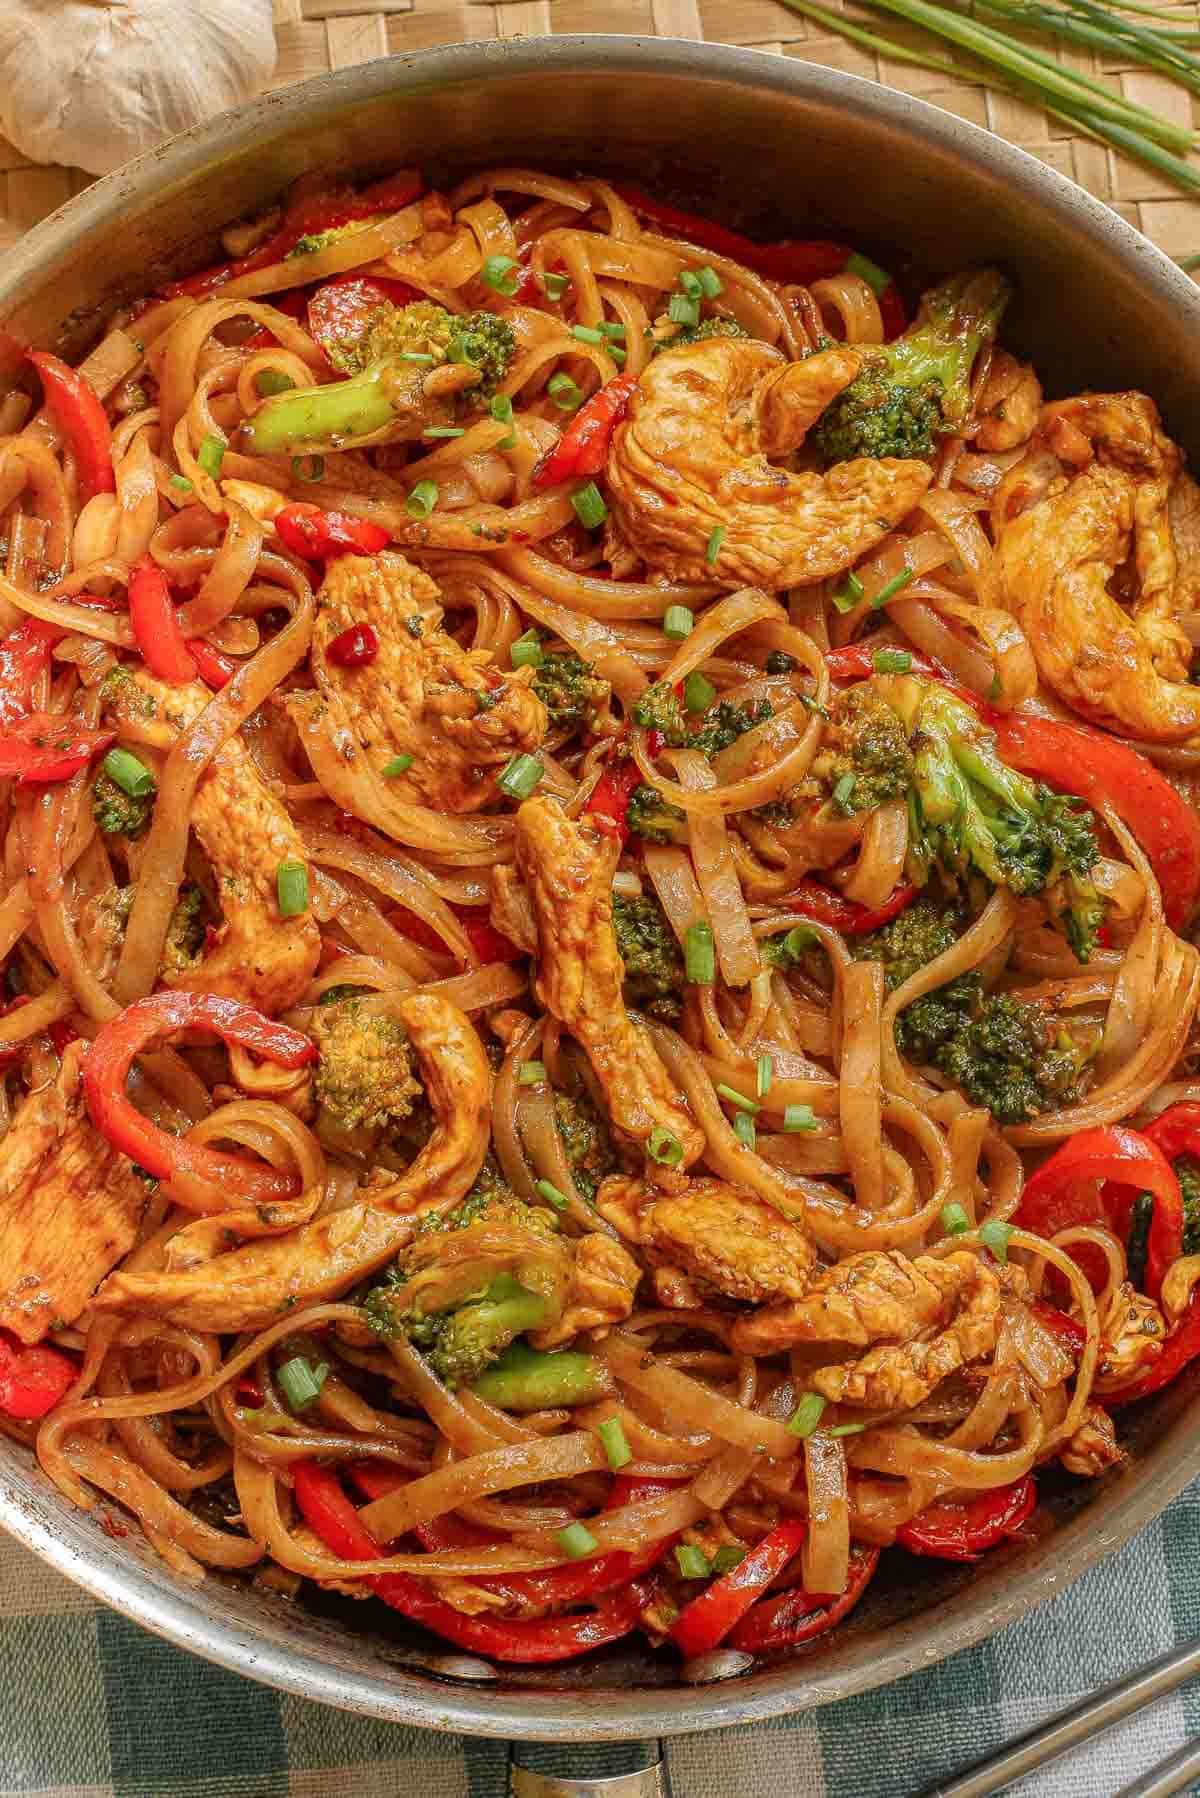 A pan full of rice noodles, chicken, red bell peppers, and broccoli in an Asian sauce.